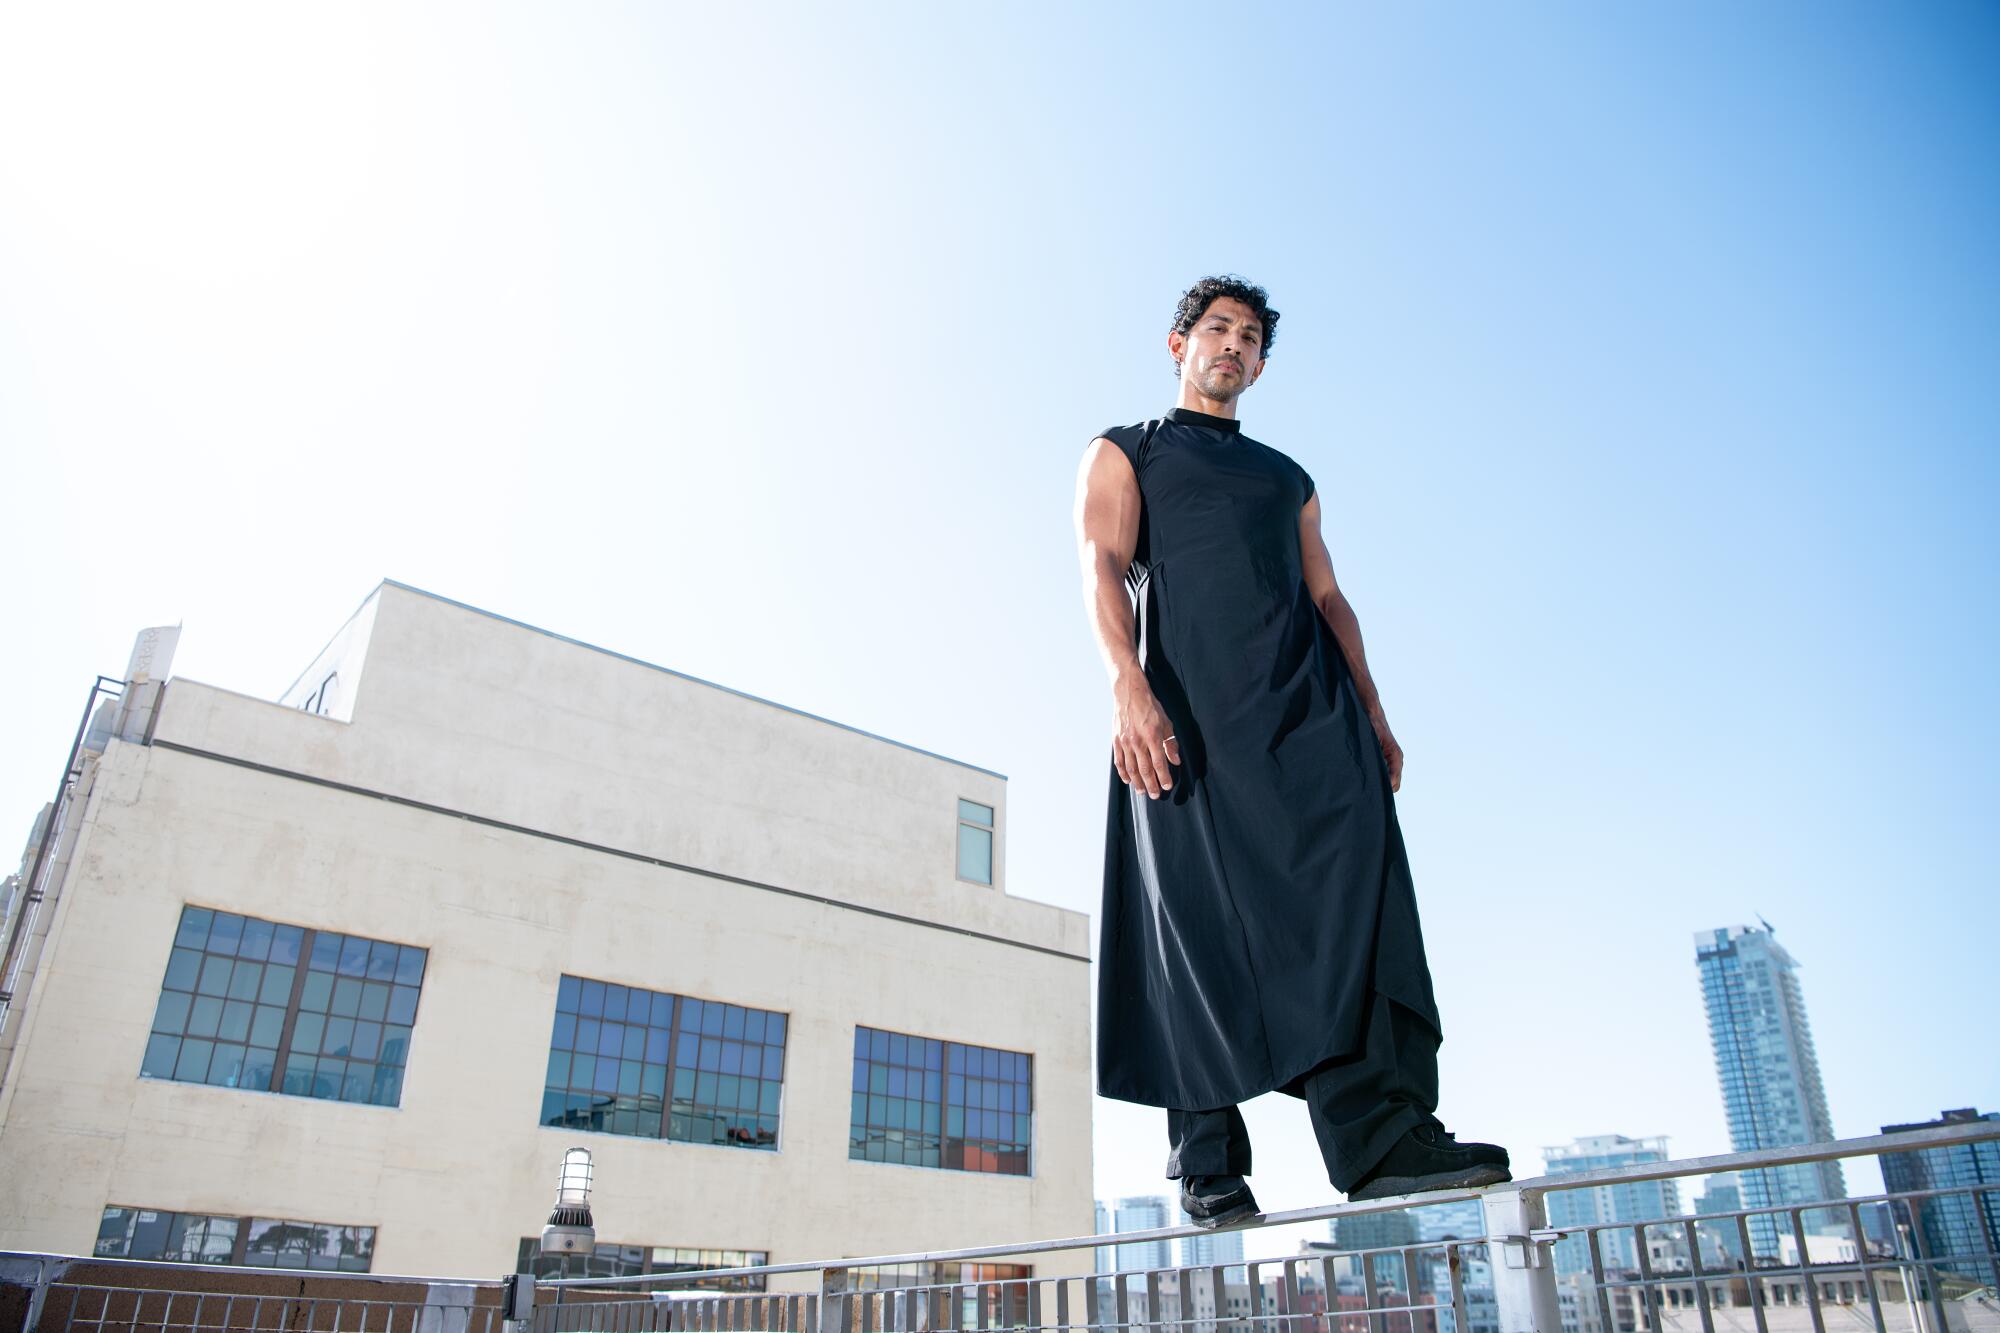 A man wearing a long black tunic stands on a building rail.